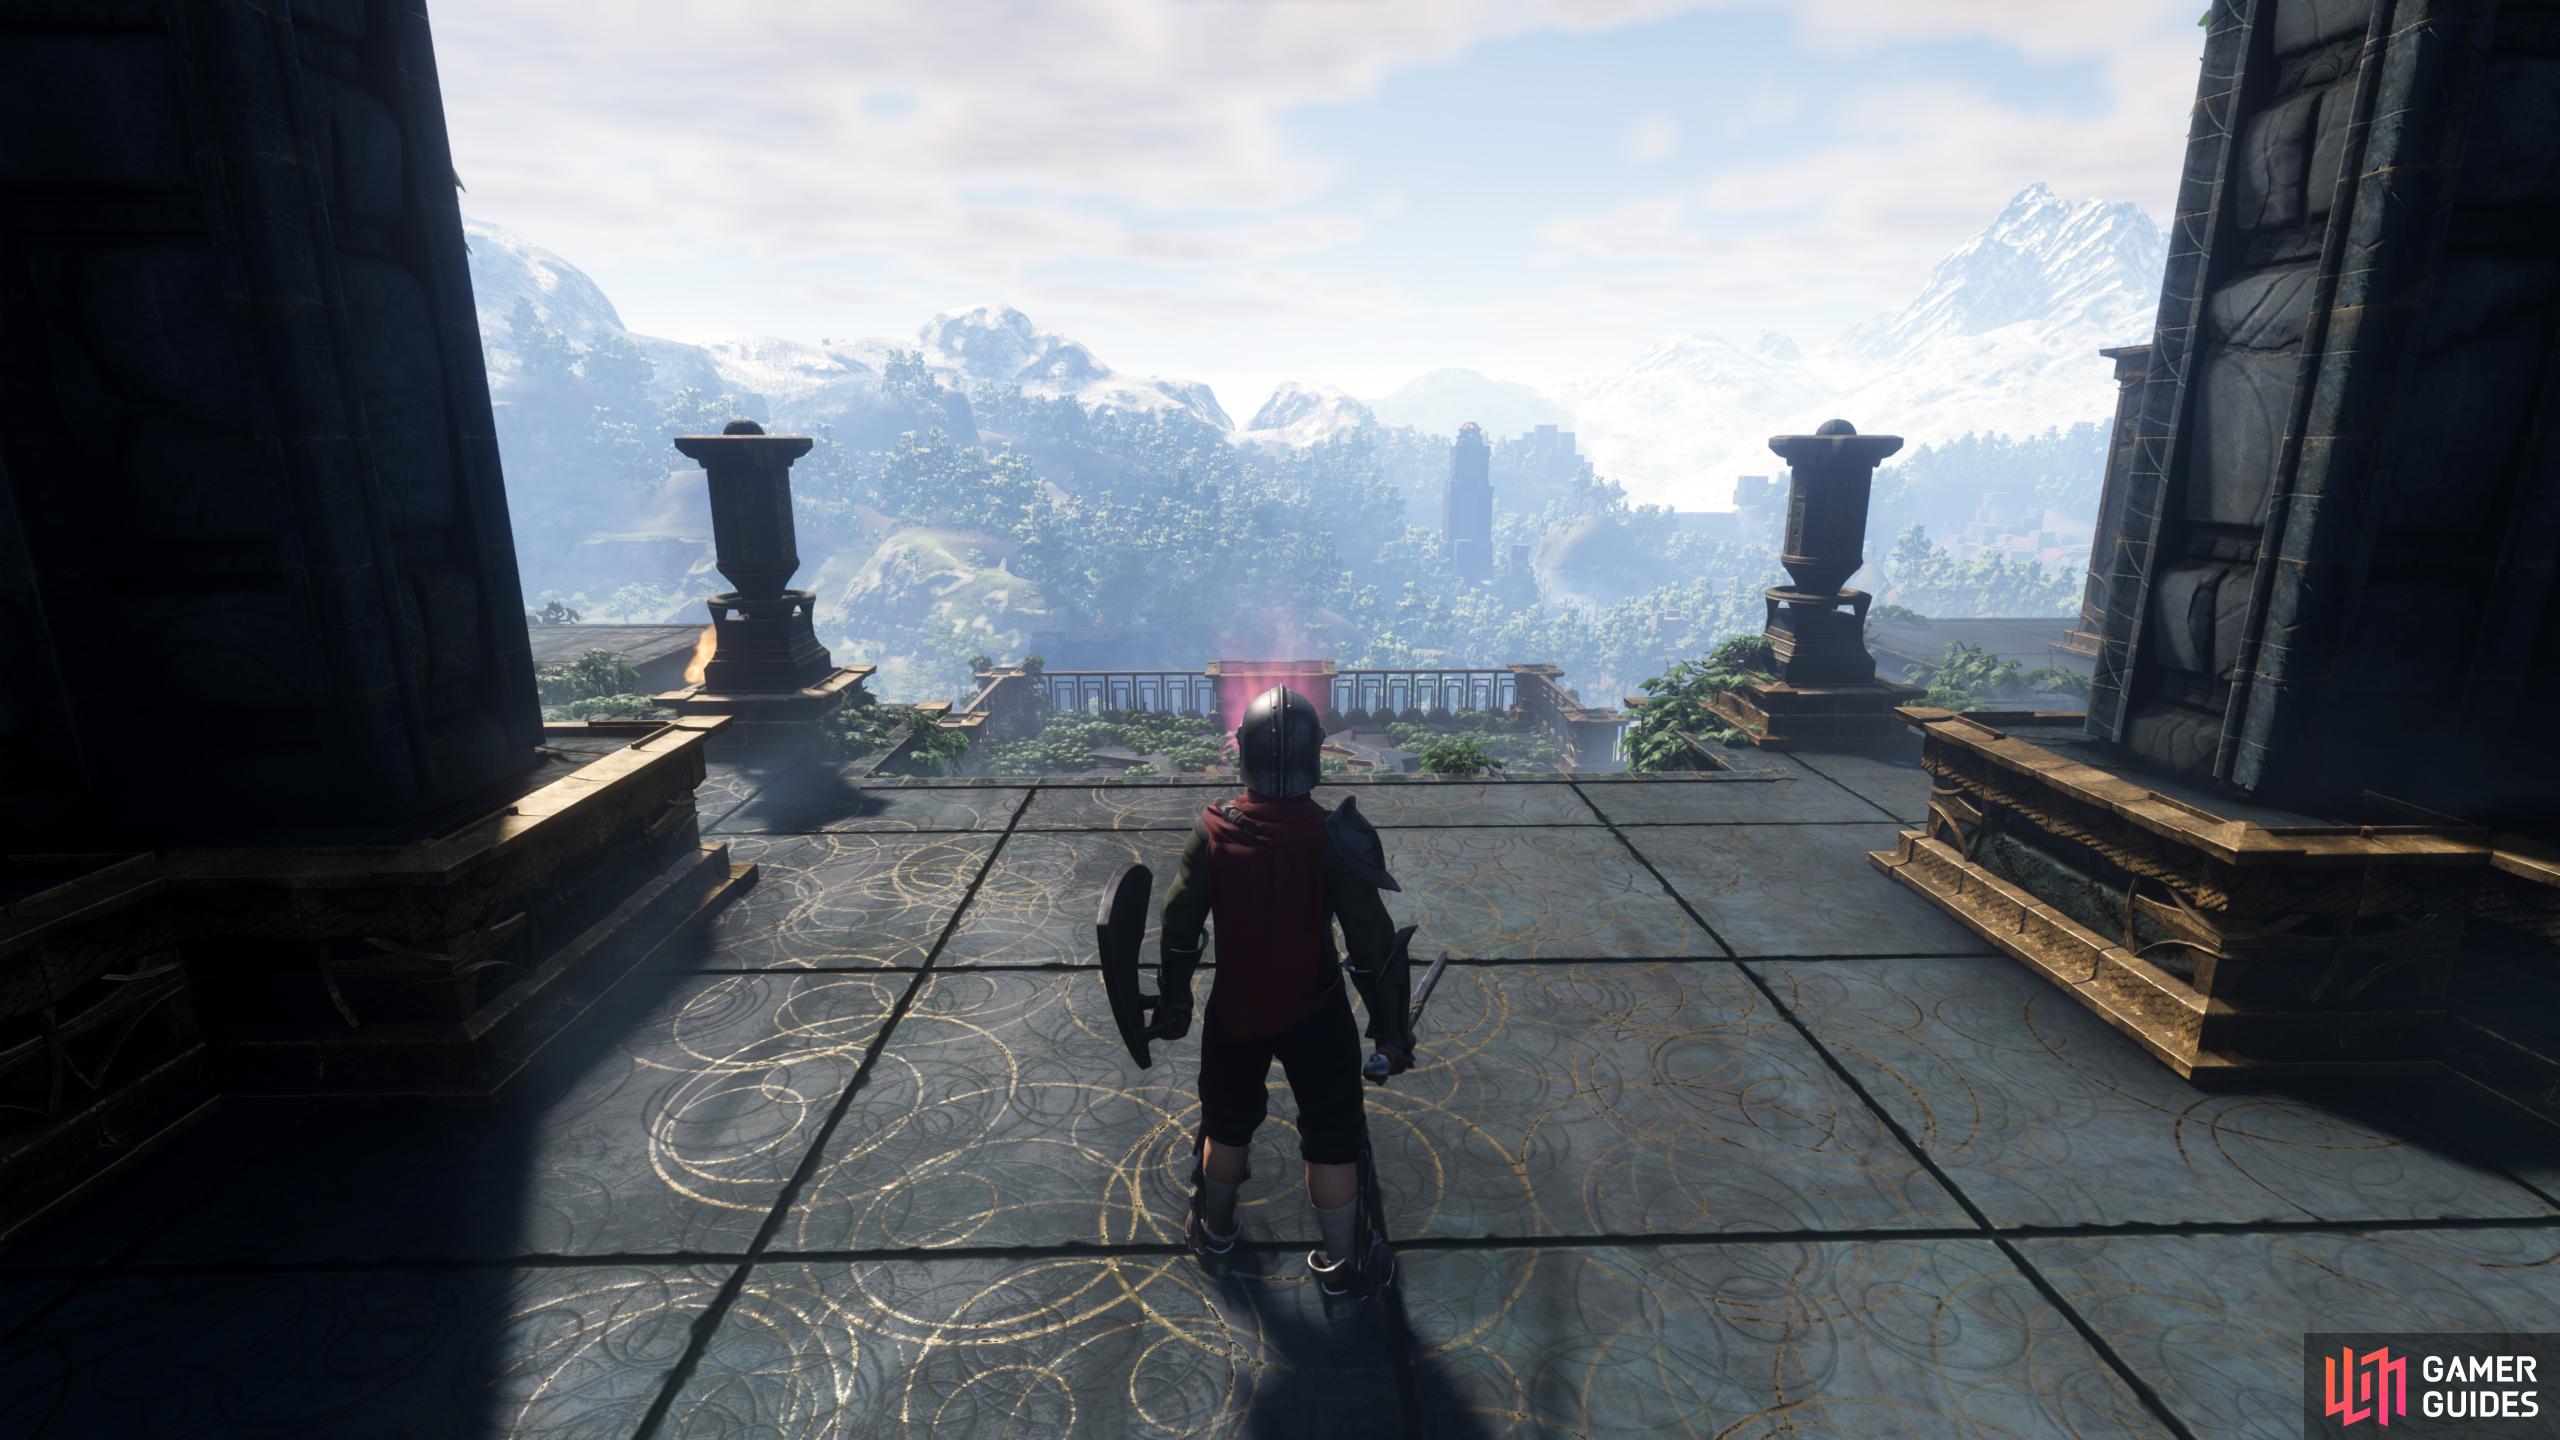 The view from the top of an Ancient Spire is breathtaking.